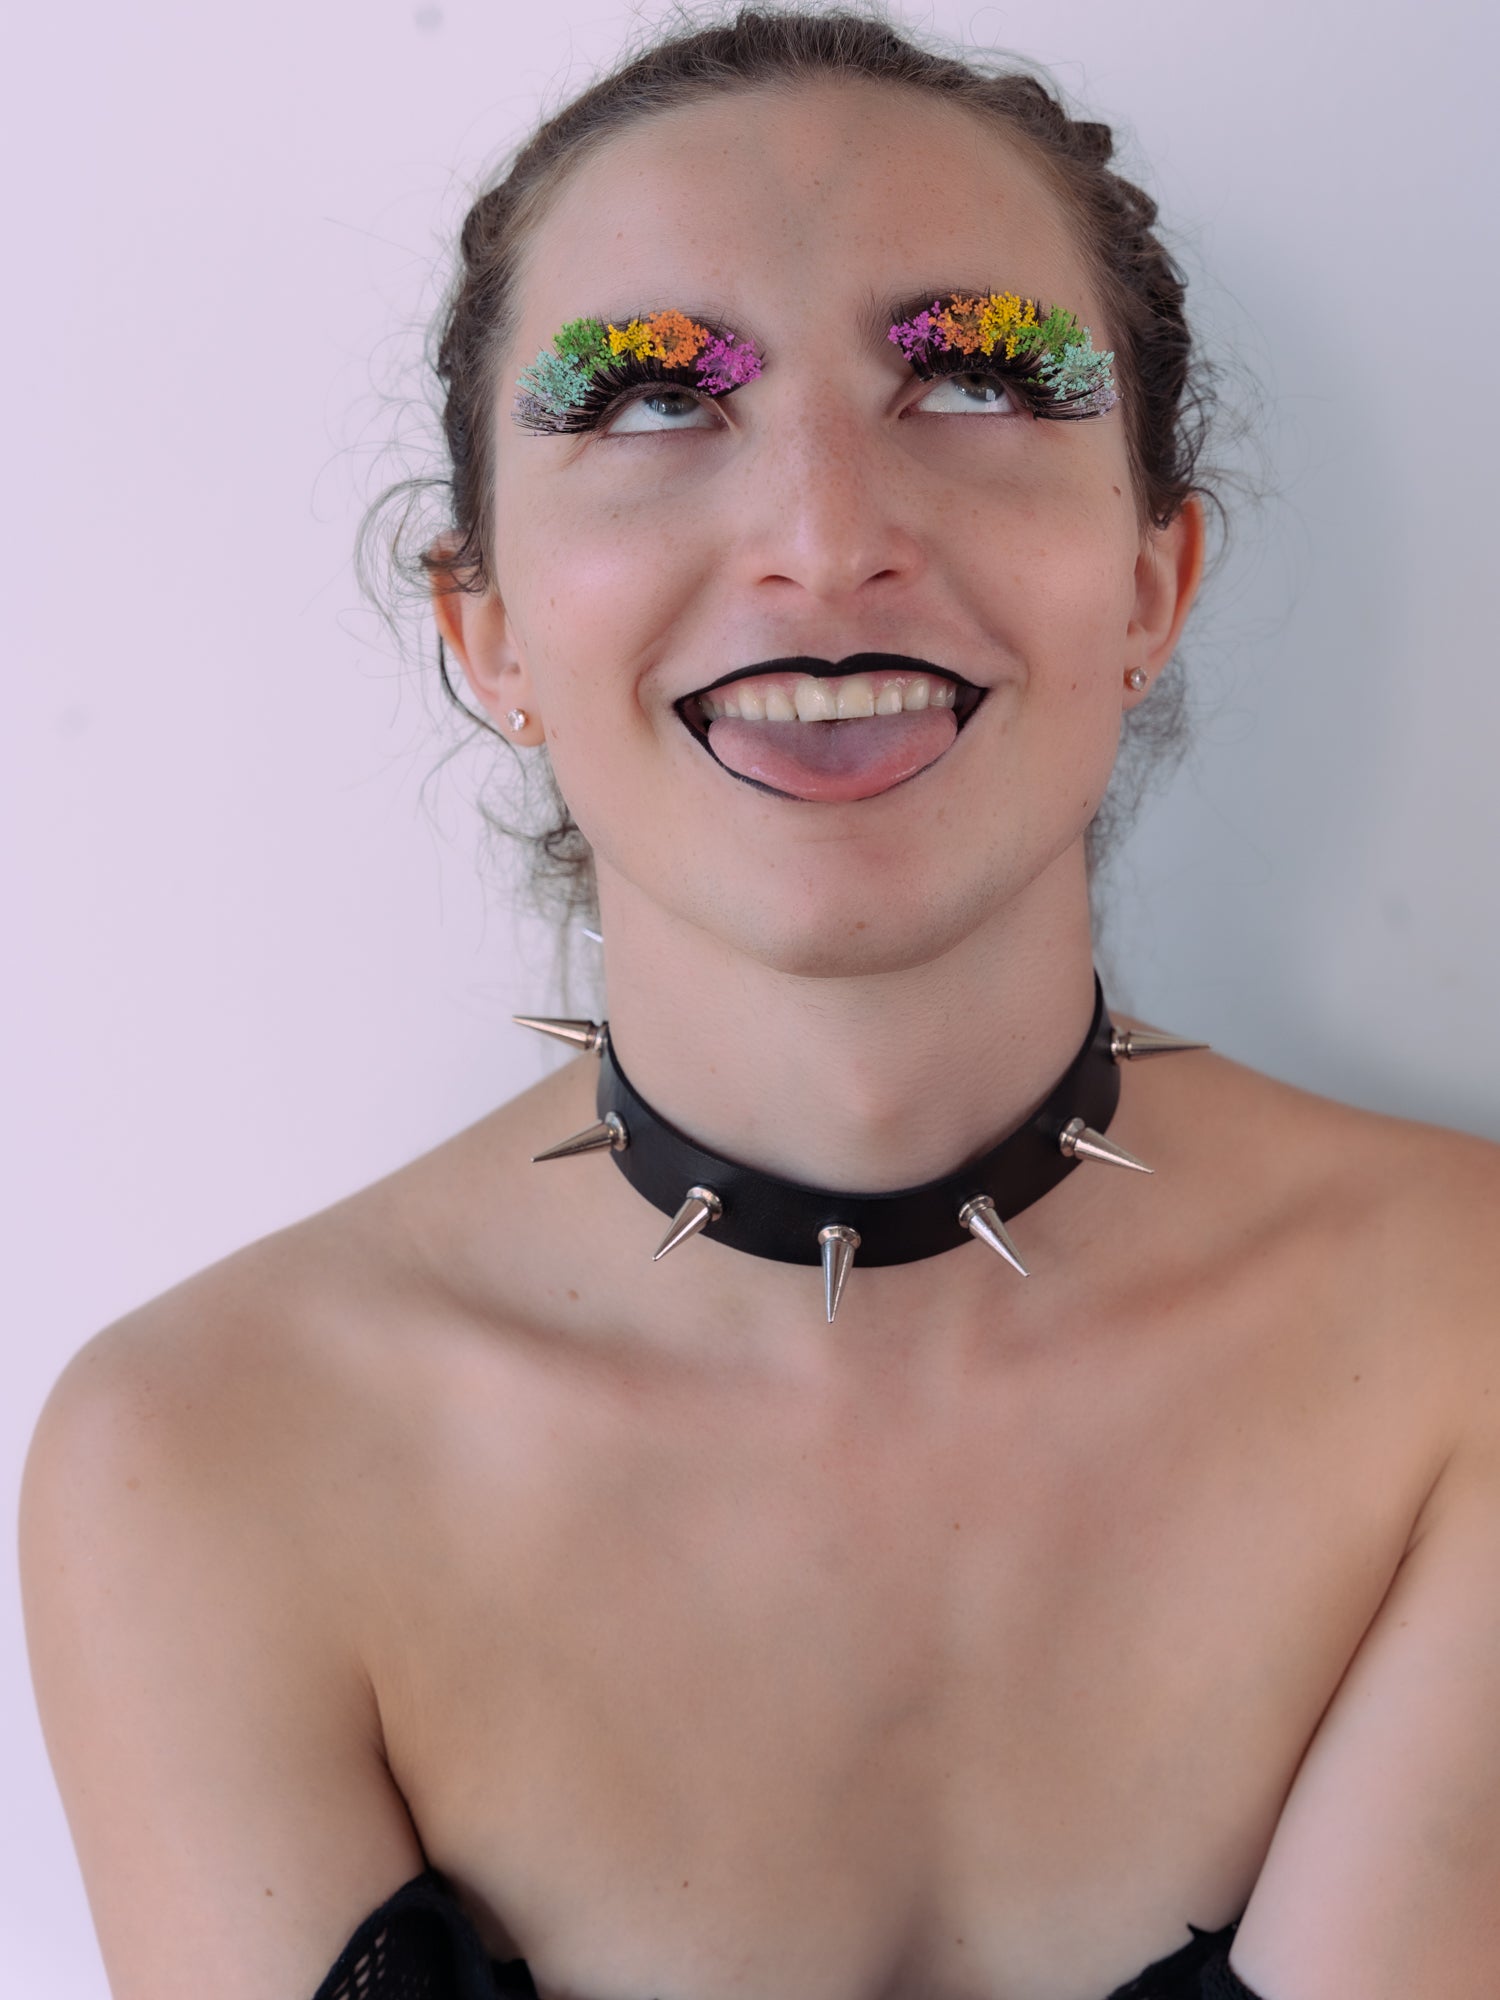 Our gorgeous model is seen from the chest up, wearing a strapless top and black and chrome spiky collar. She's sporting black lipstick and a pair of rainbow Bloom Lashes by BFlare Beauty. 